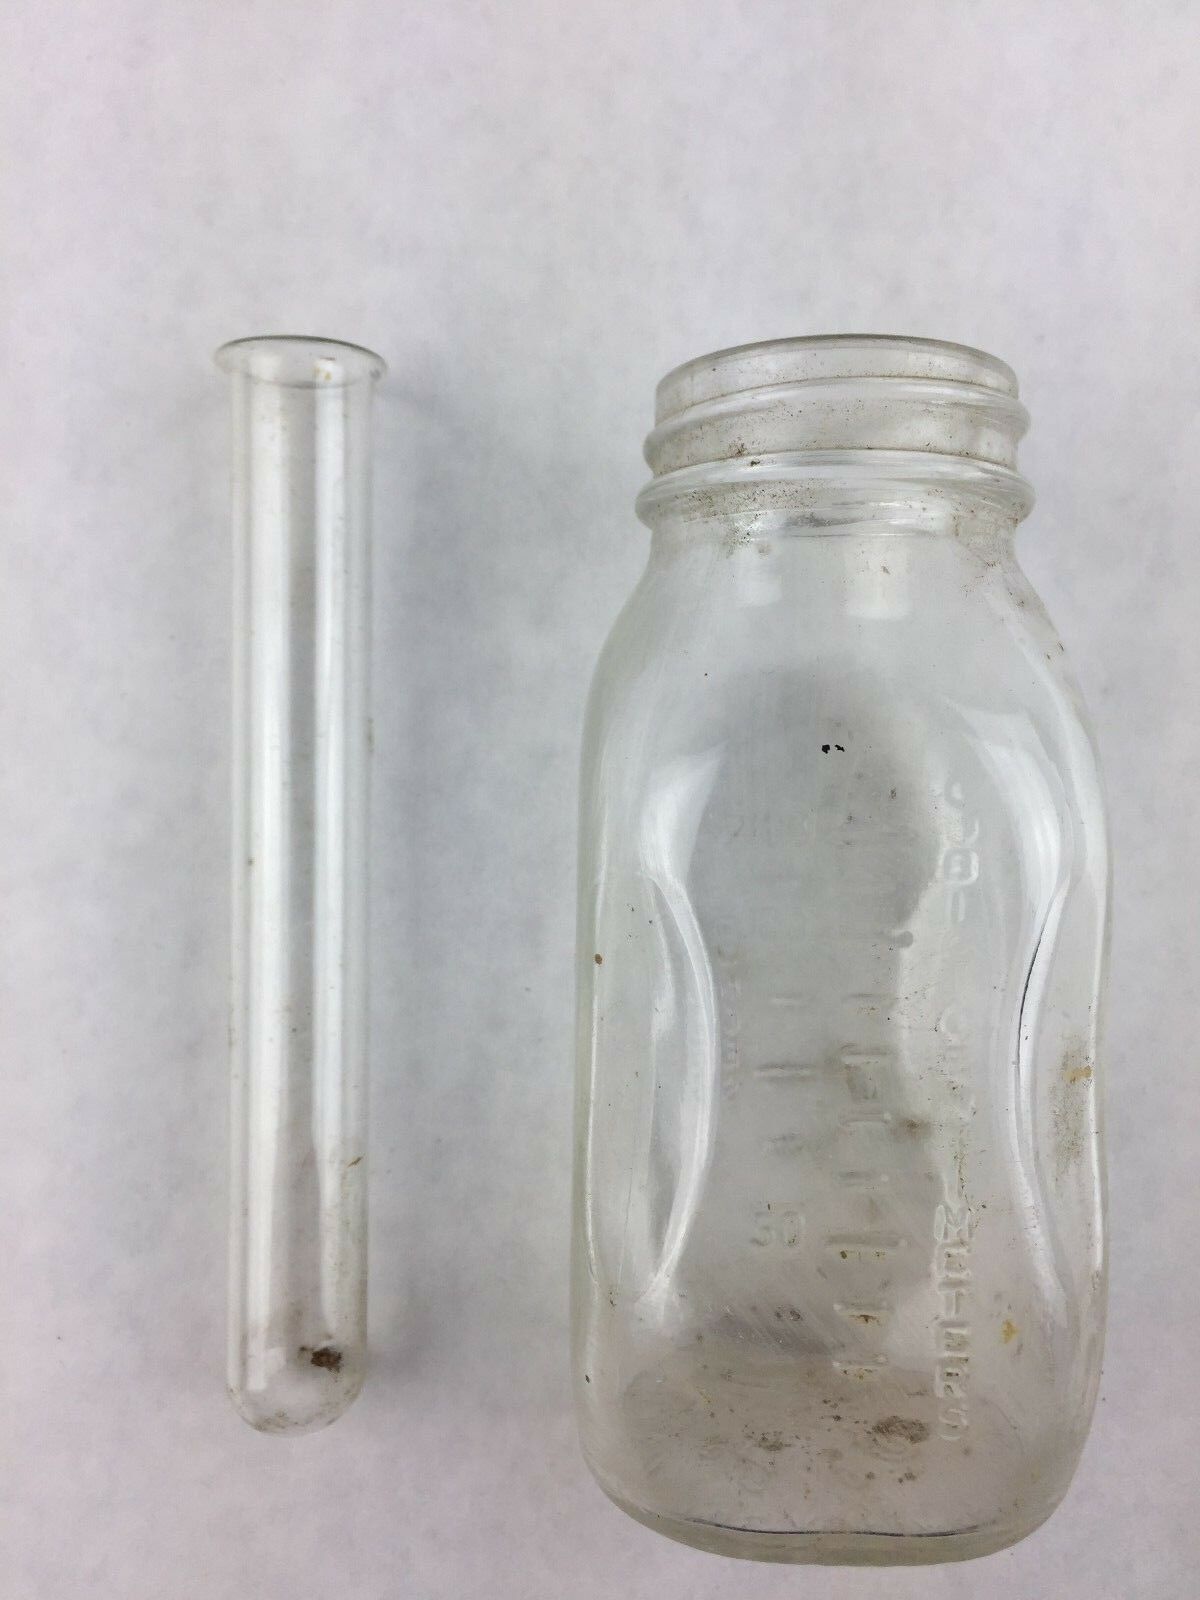 Primary image for Vintage Pharmacy Curity Sure Grip Bottle and Test Tube